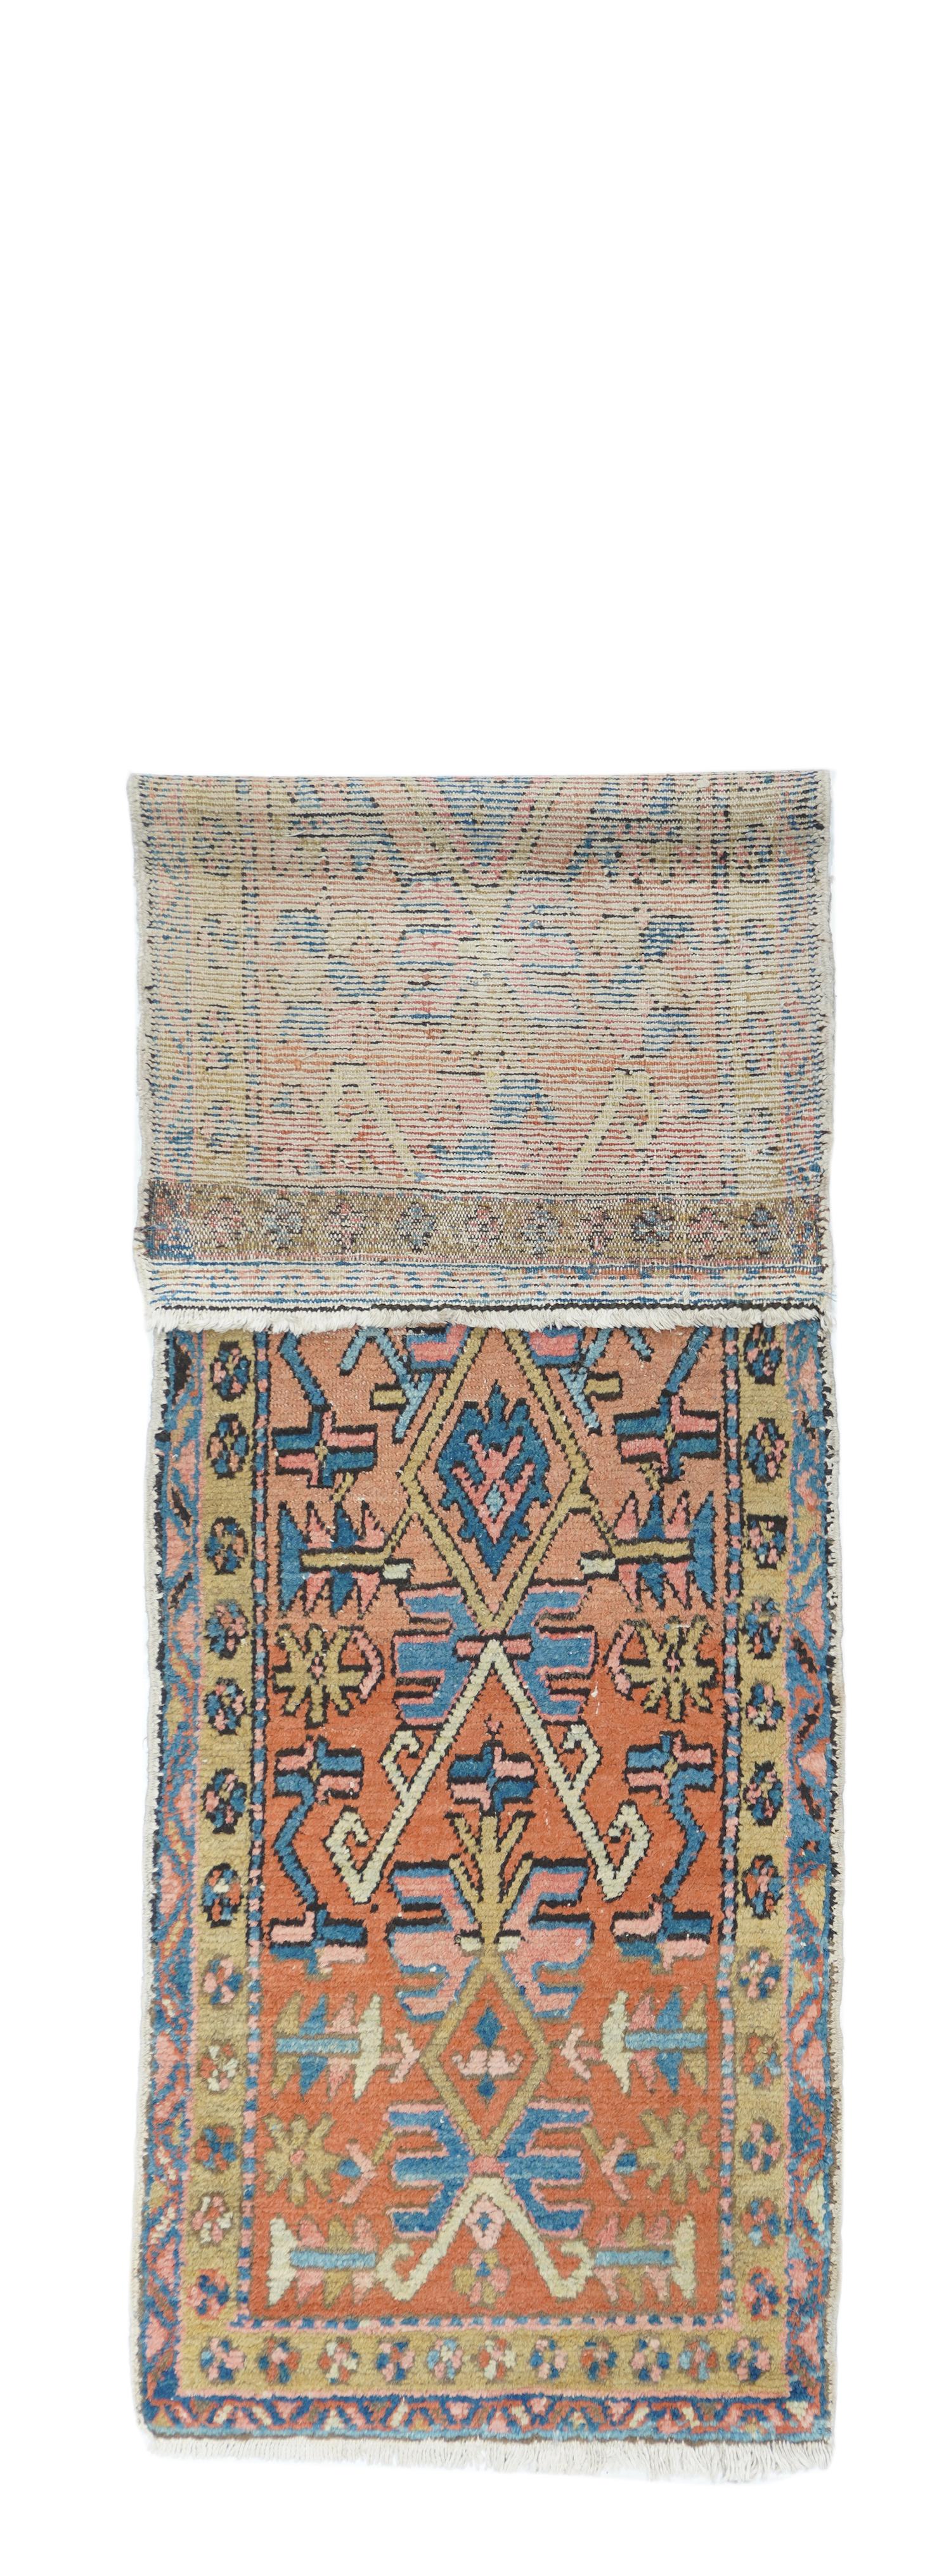 Probably Mishkin. This rather coarsely wove, cotton foundation, geometric pattern rustic runner (kenare) shows a  lozenge and inverted V pattern in ecru and straw on an abrashing  light rust to rusty-camel   ground.  Highlights in light blue, pale